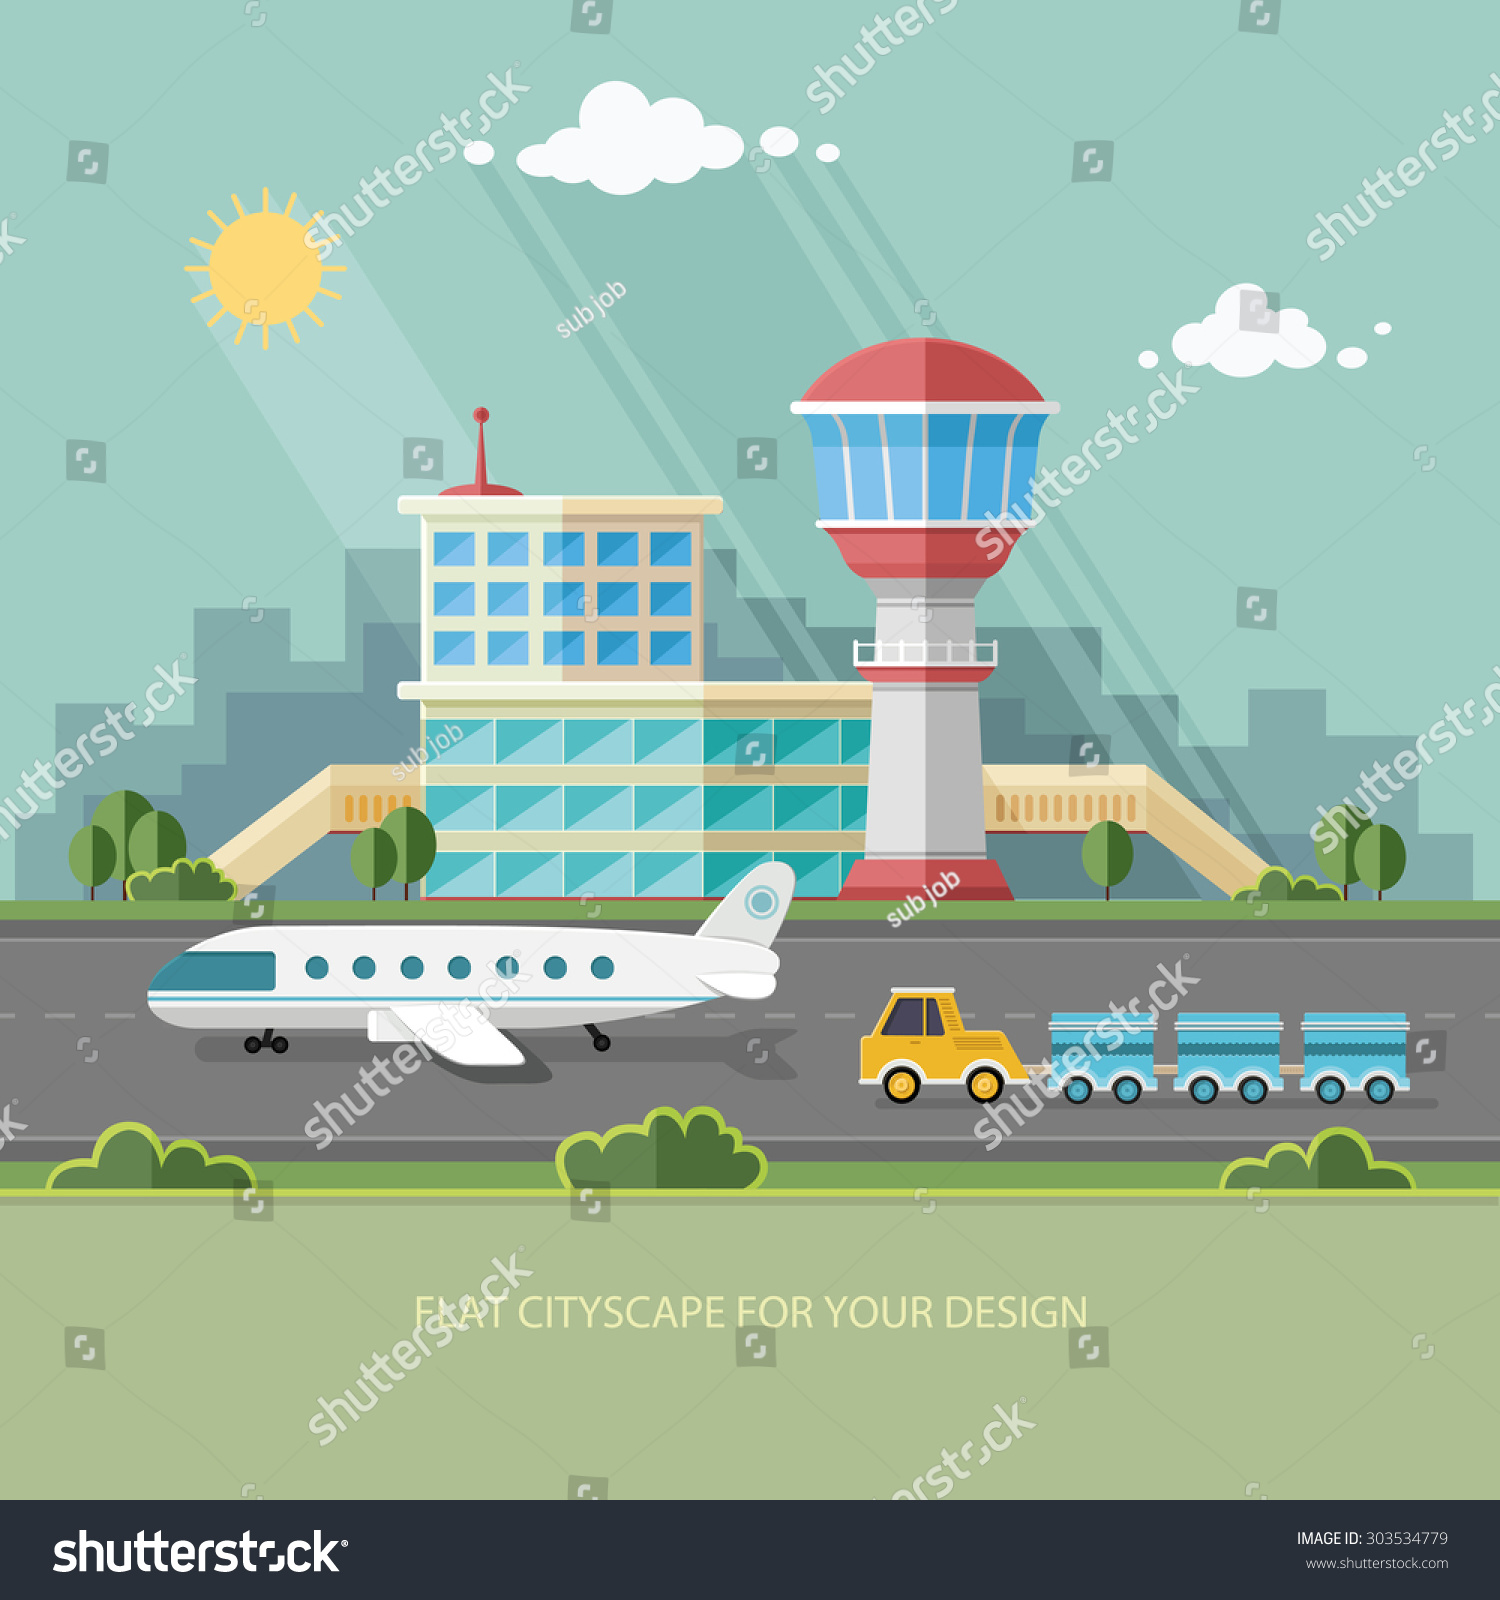 airport building clipart - photo #15